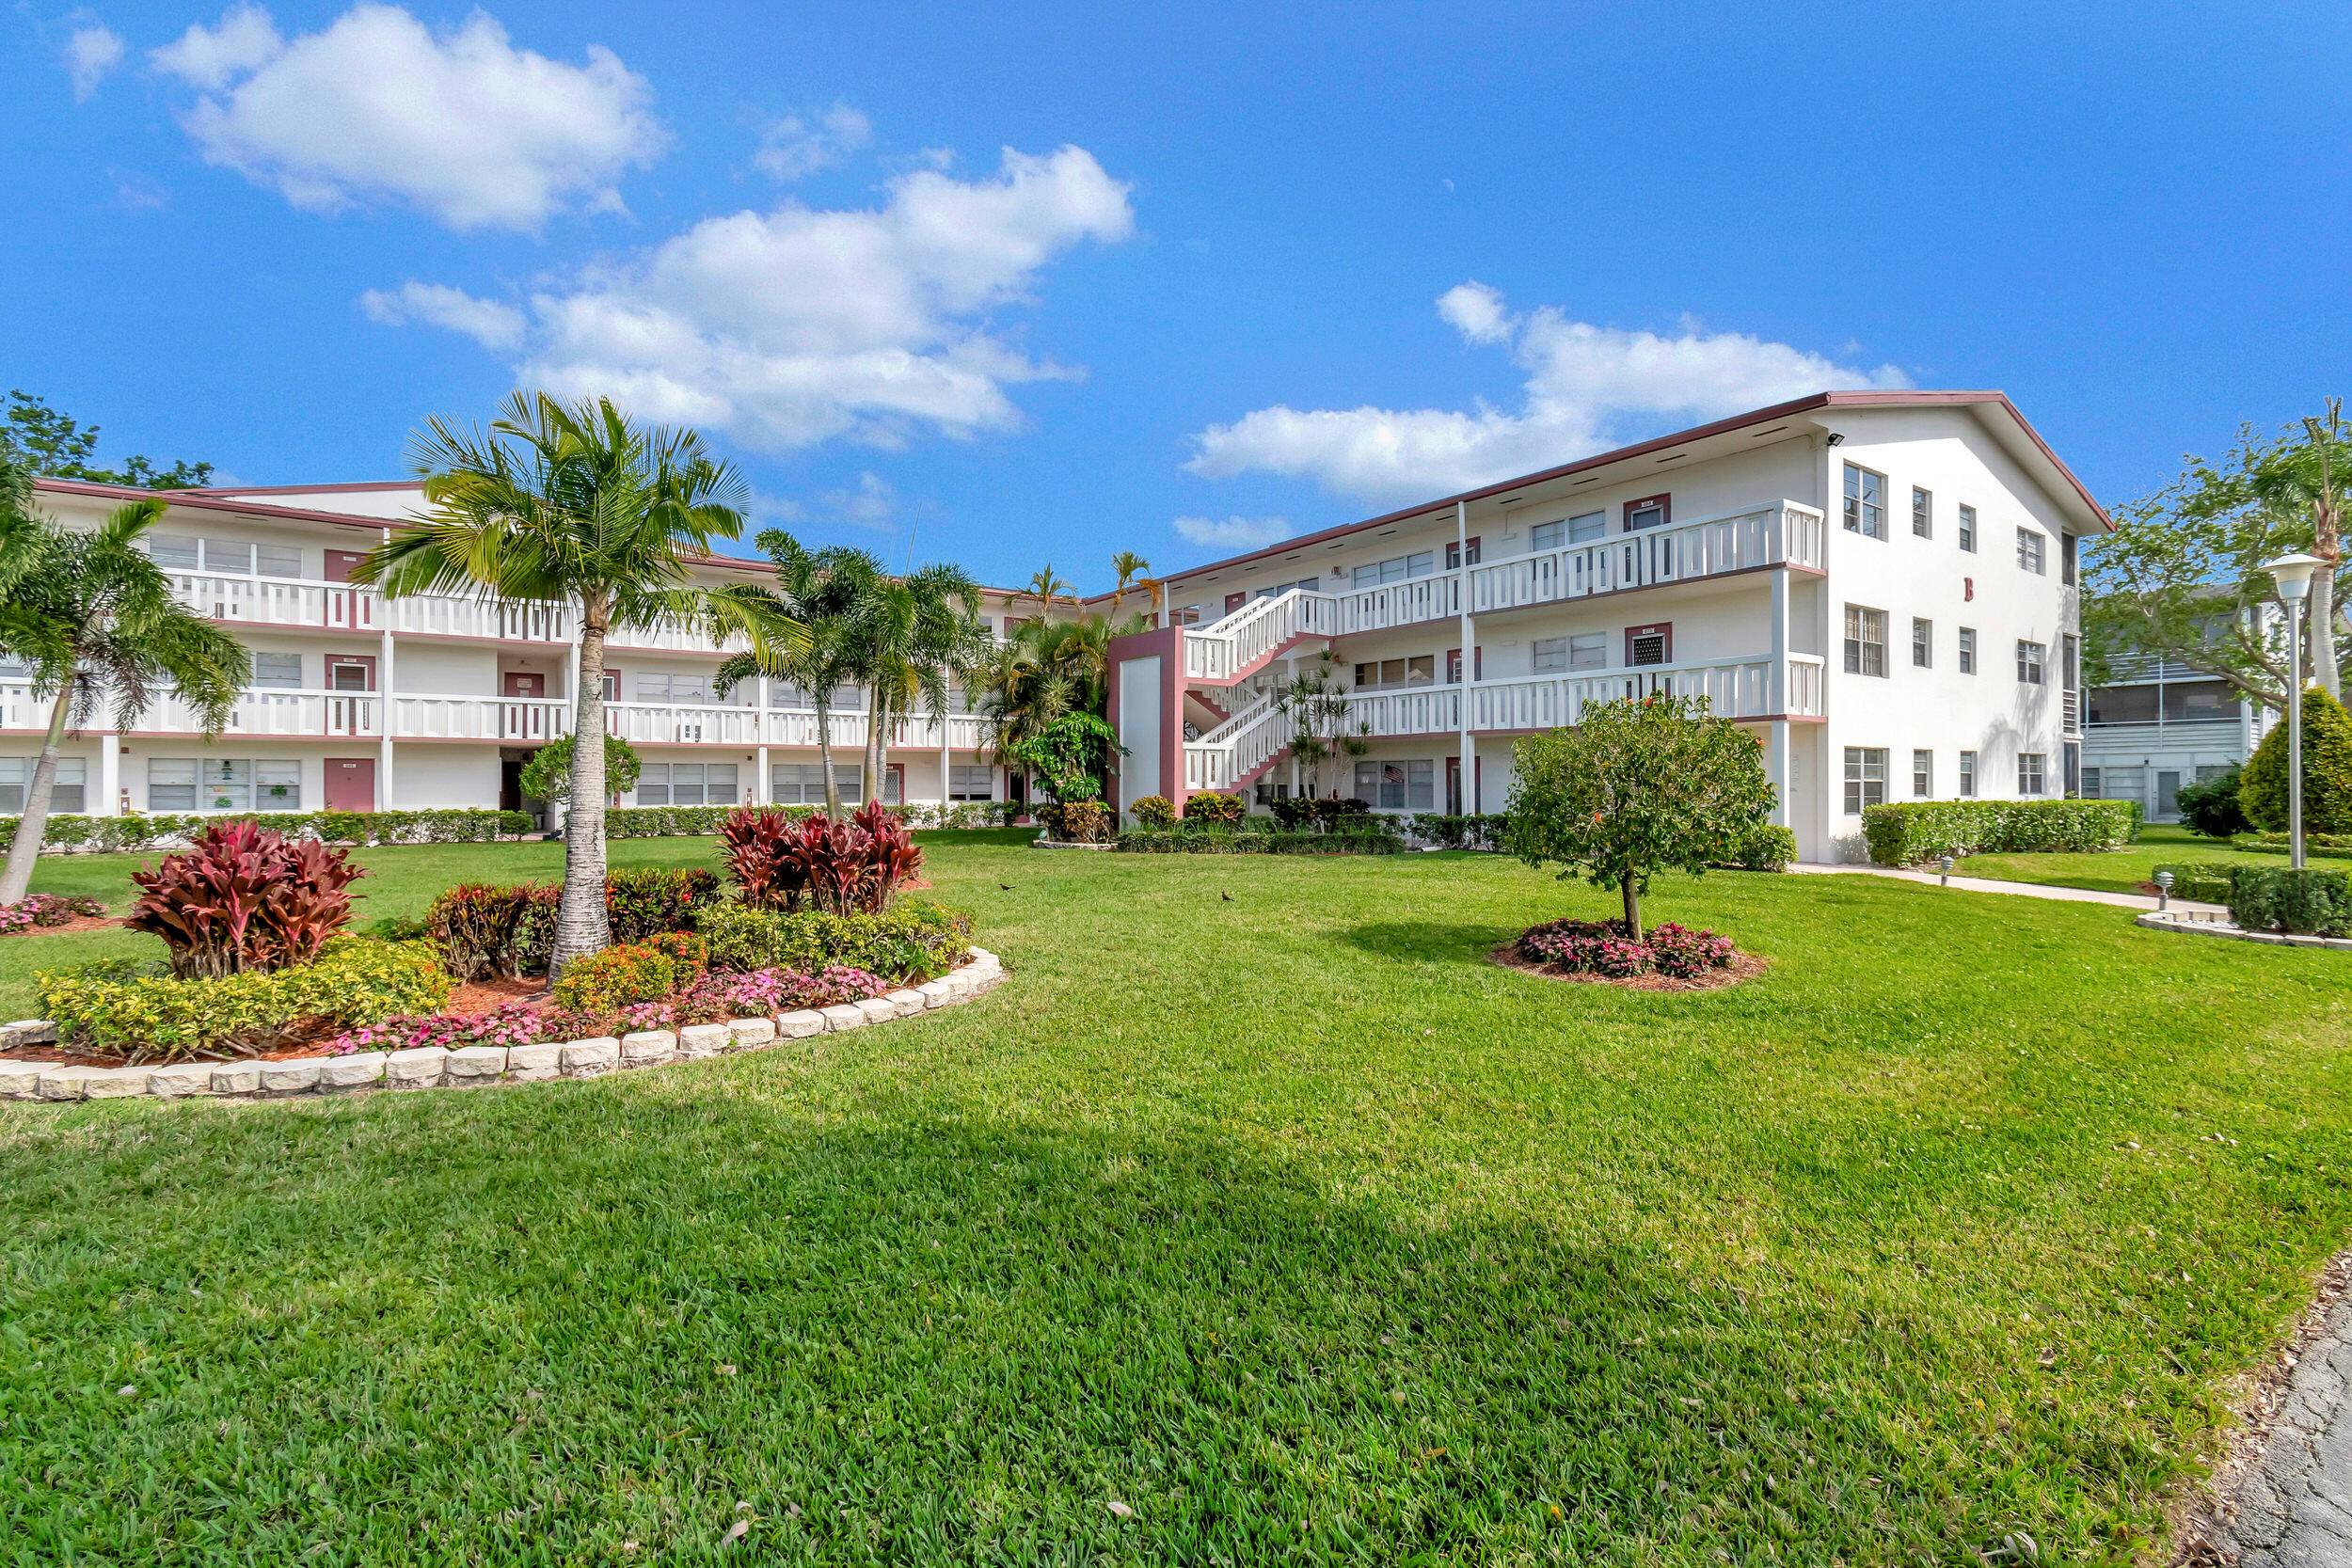 Welcome to Century Village Boca Raton ideal for investors or as your primary home.